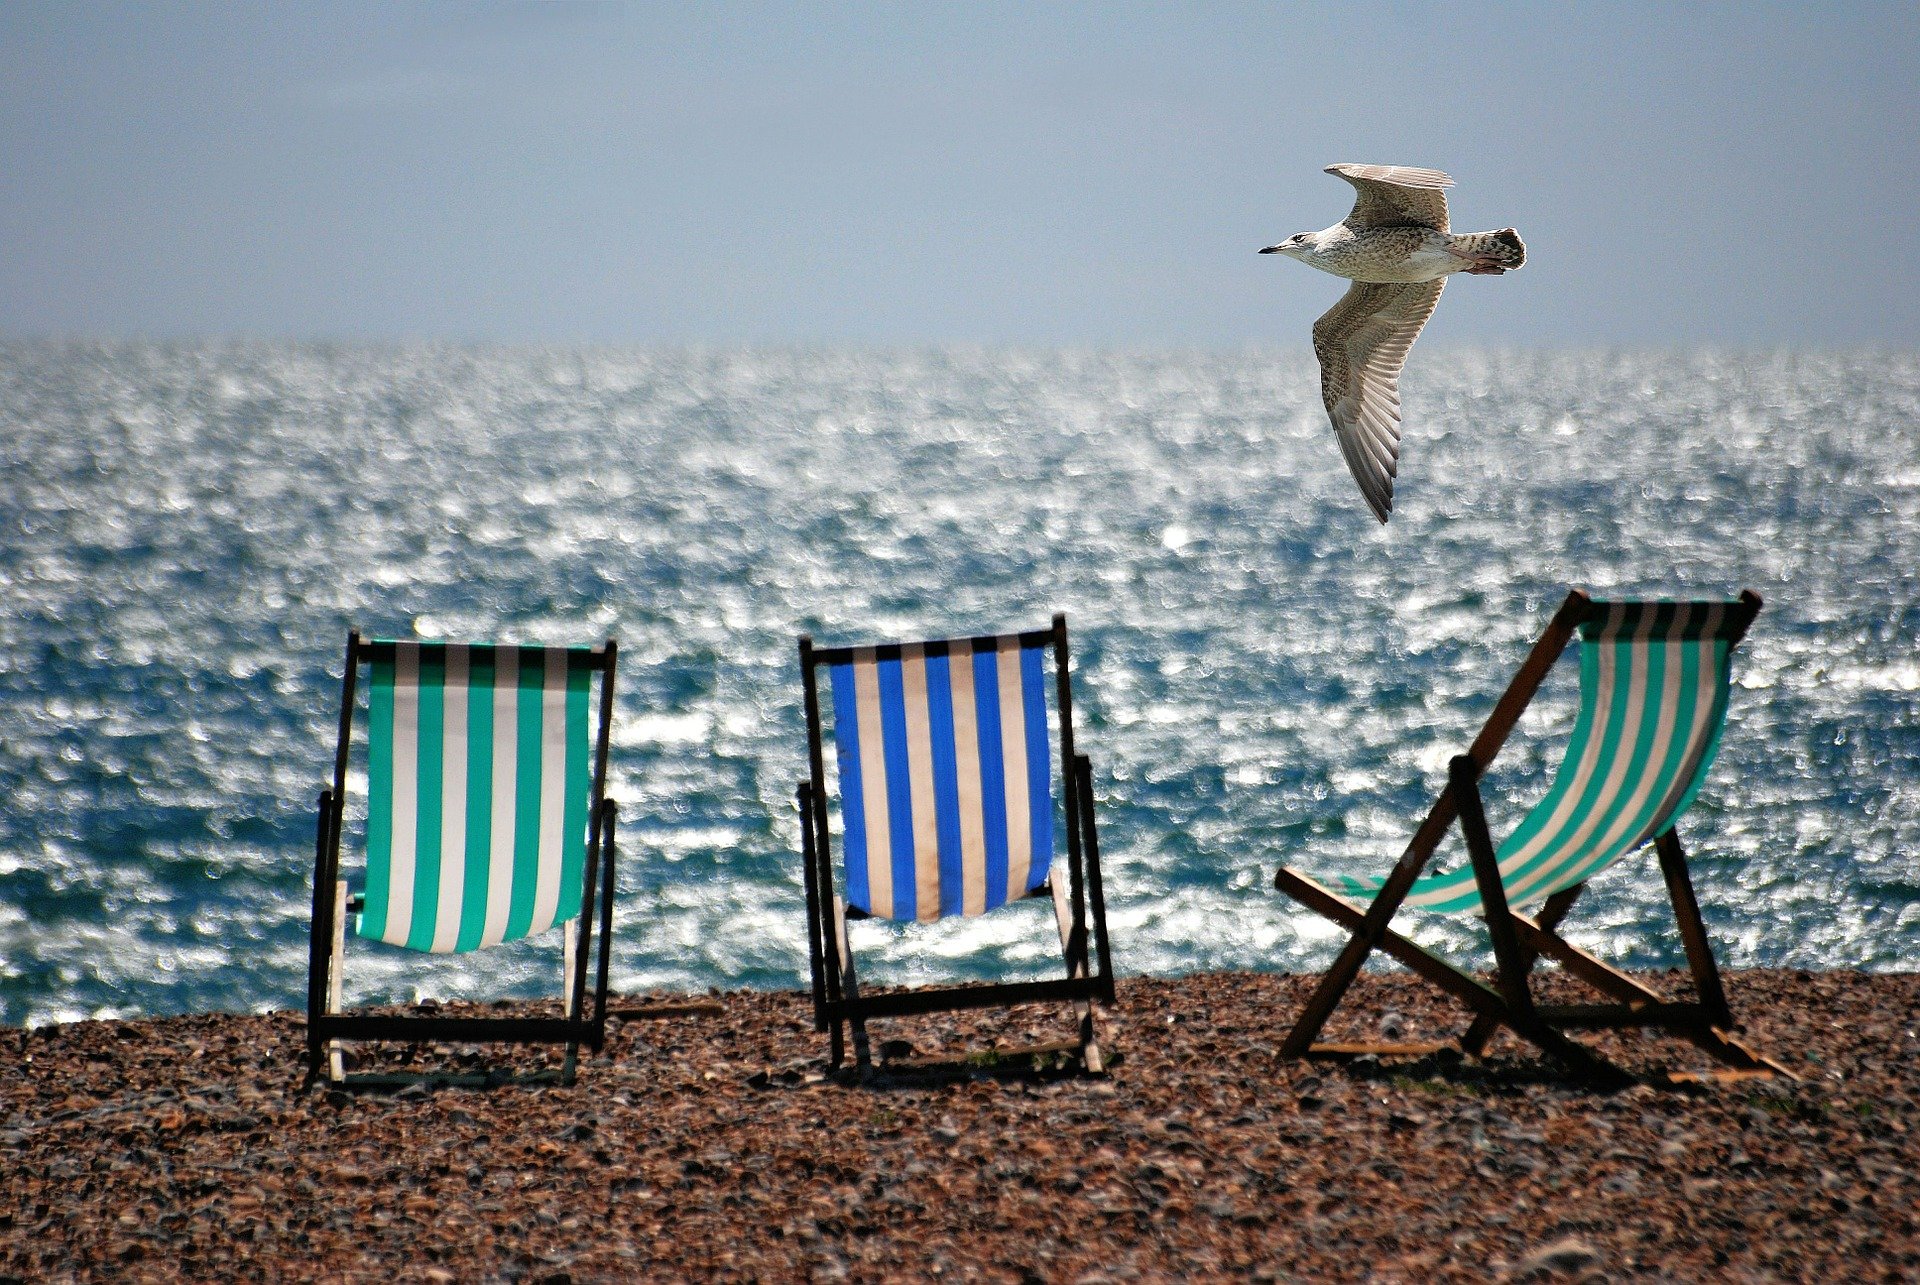 NEWS | Matt Hancock – “Government doing all it can to ensure people can enjoy a summer holiday”